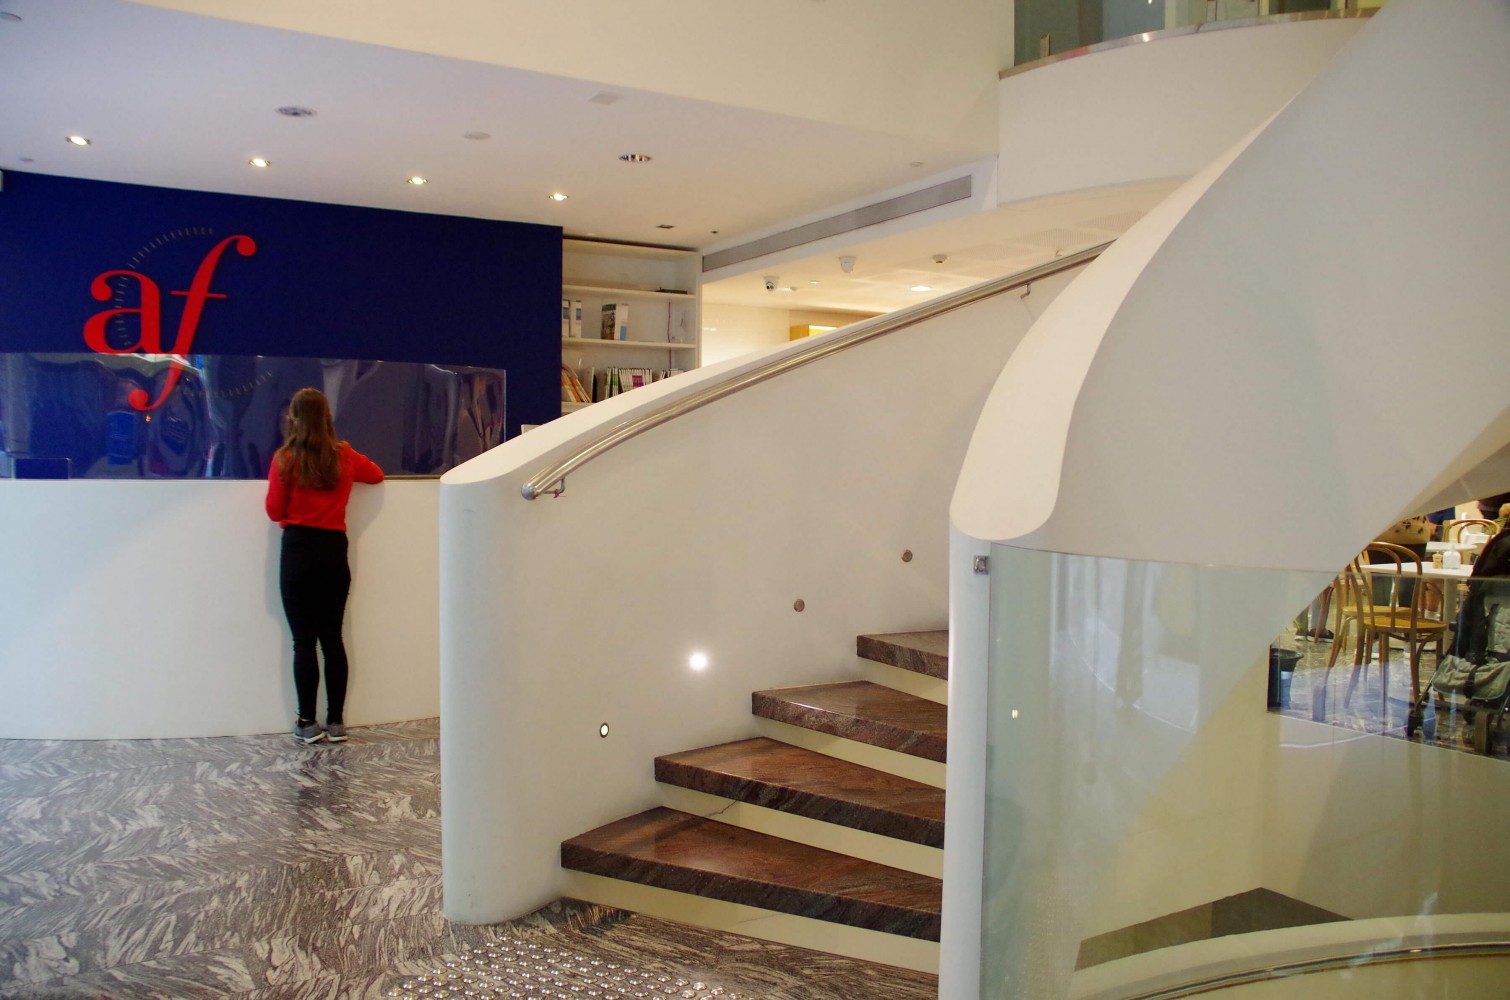 Cascading staircase and reception desk at Alliance Francaise de Sydney Centre in Sydney's CBD, designed by architect Harry Seidler